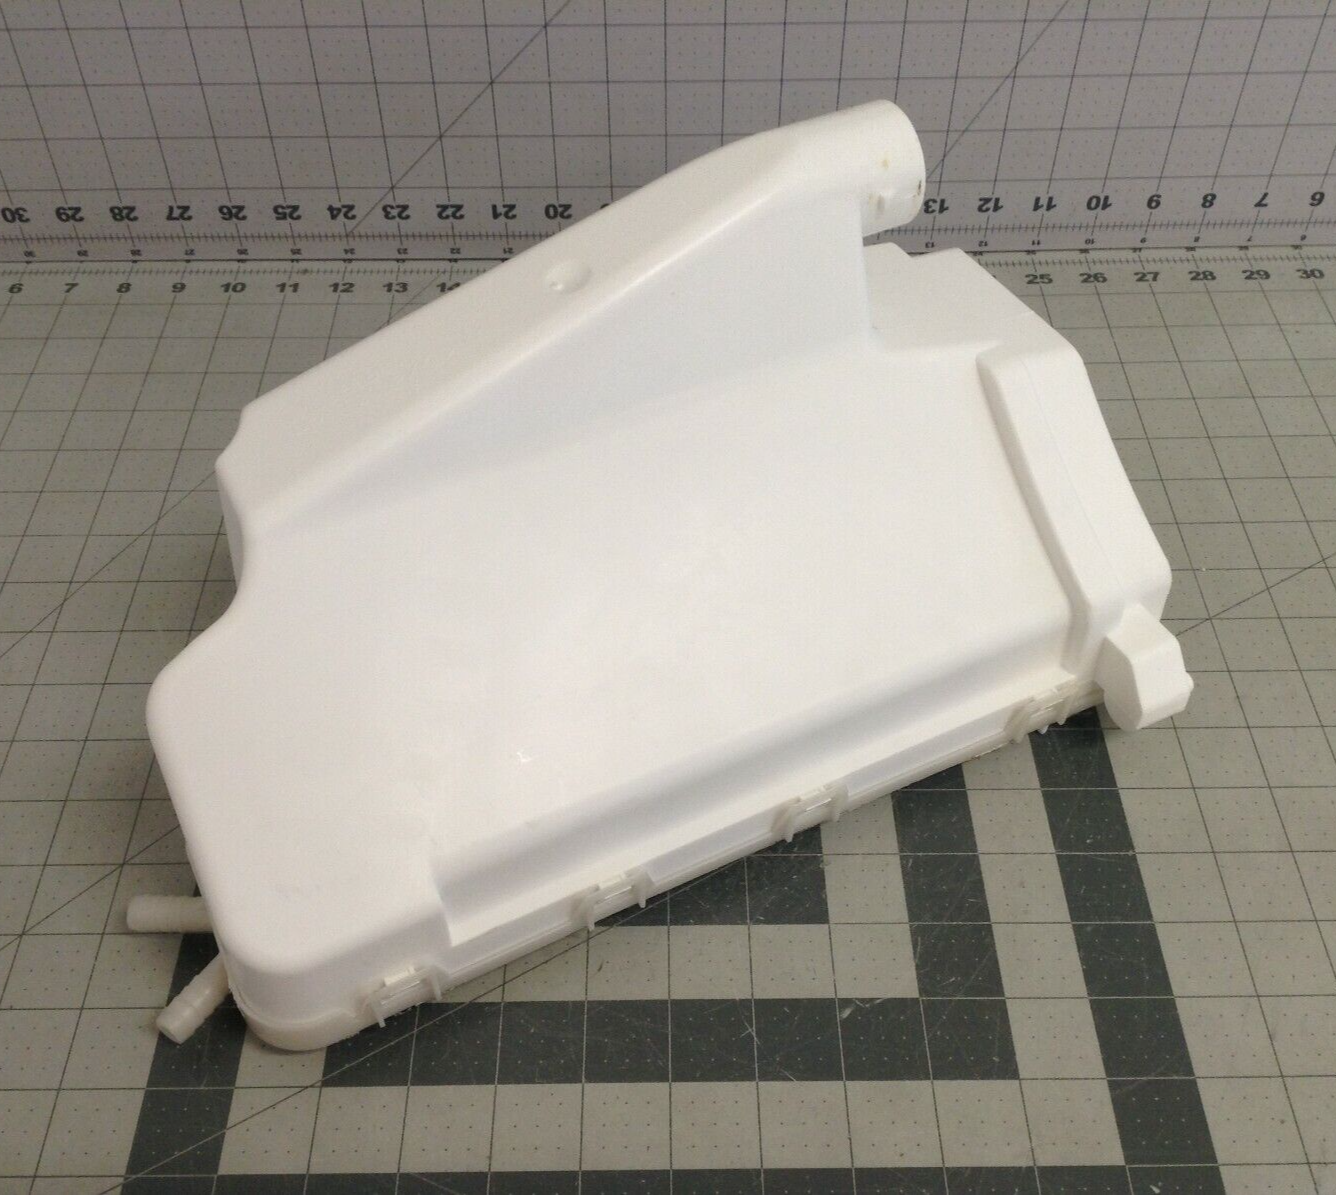 Primary image for Maytag Whirlpool Washer Dispenser Drawer Housing W10575334 W10365881 W10759476 